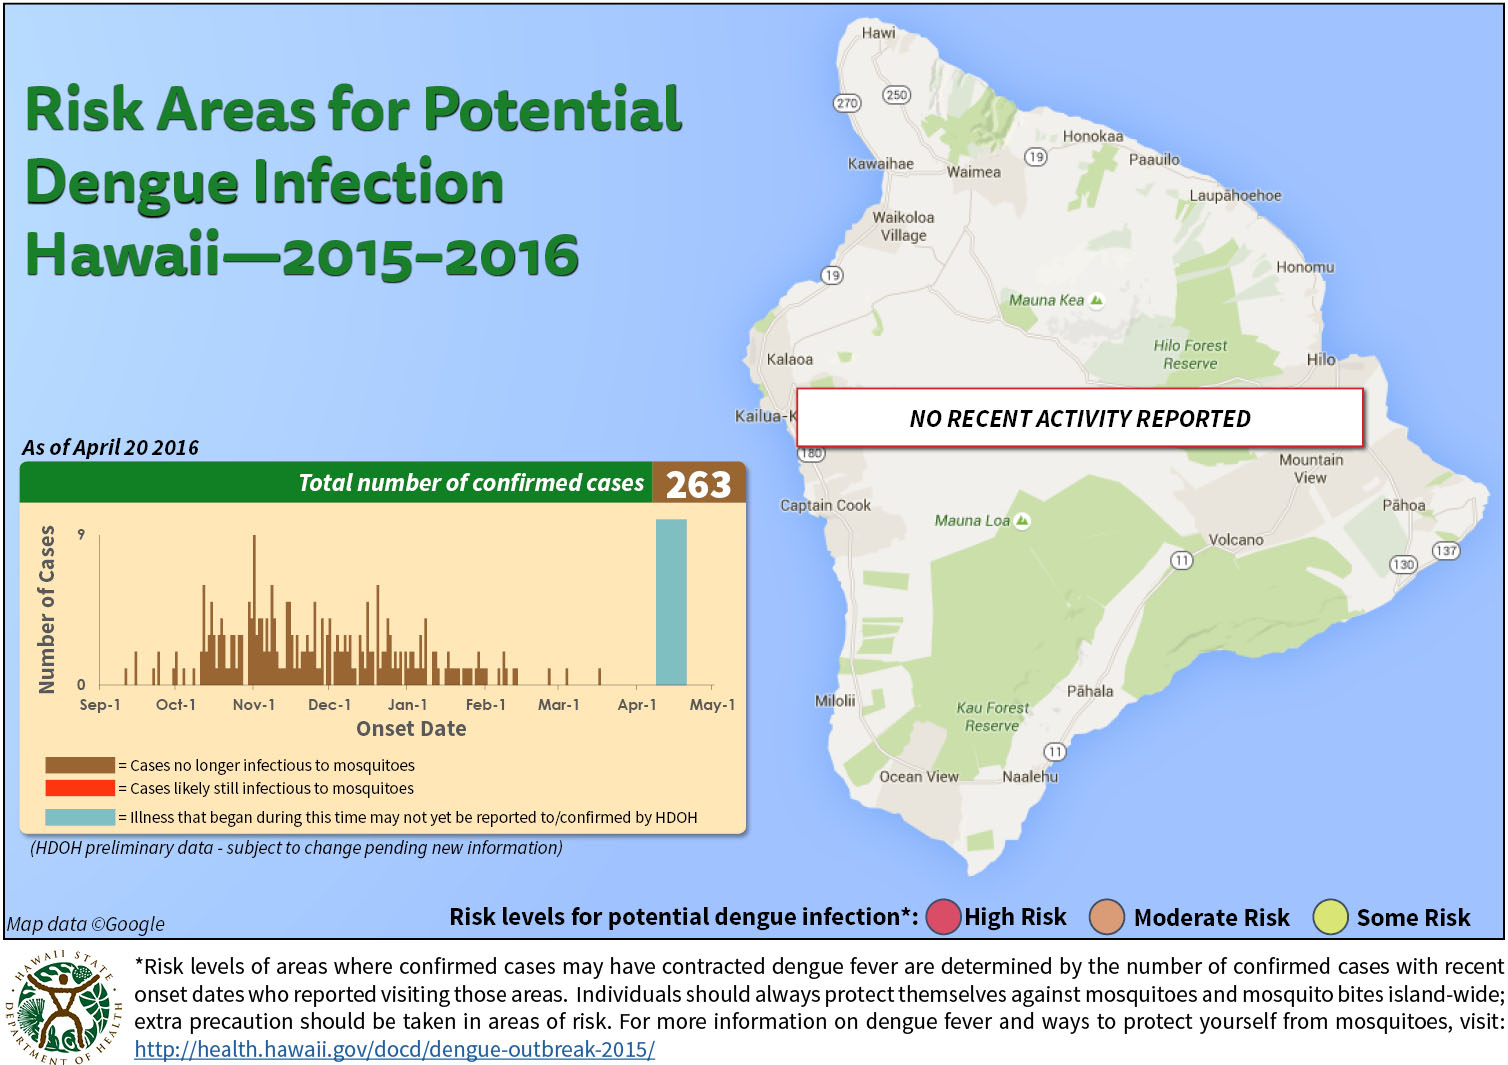 Risk areas for potential dengue infection Hawaii 2015-2016